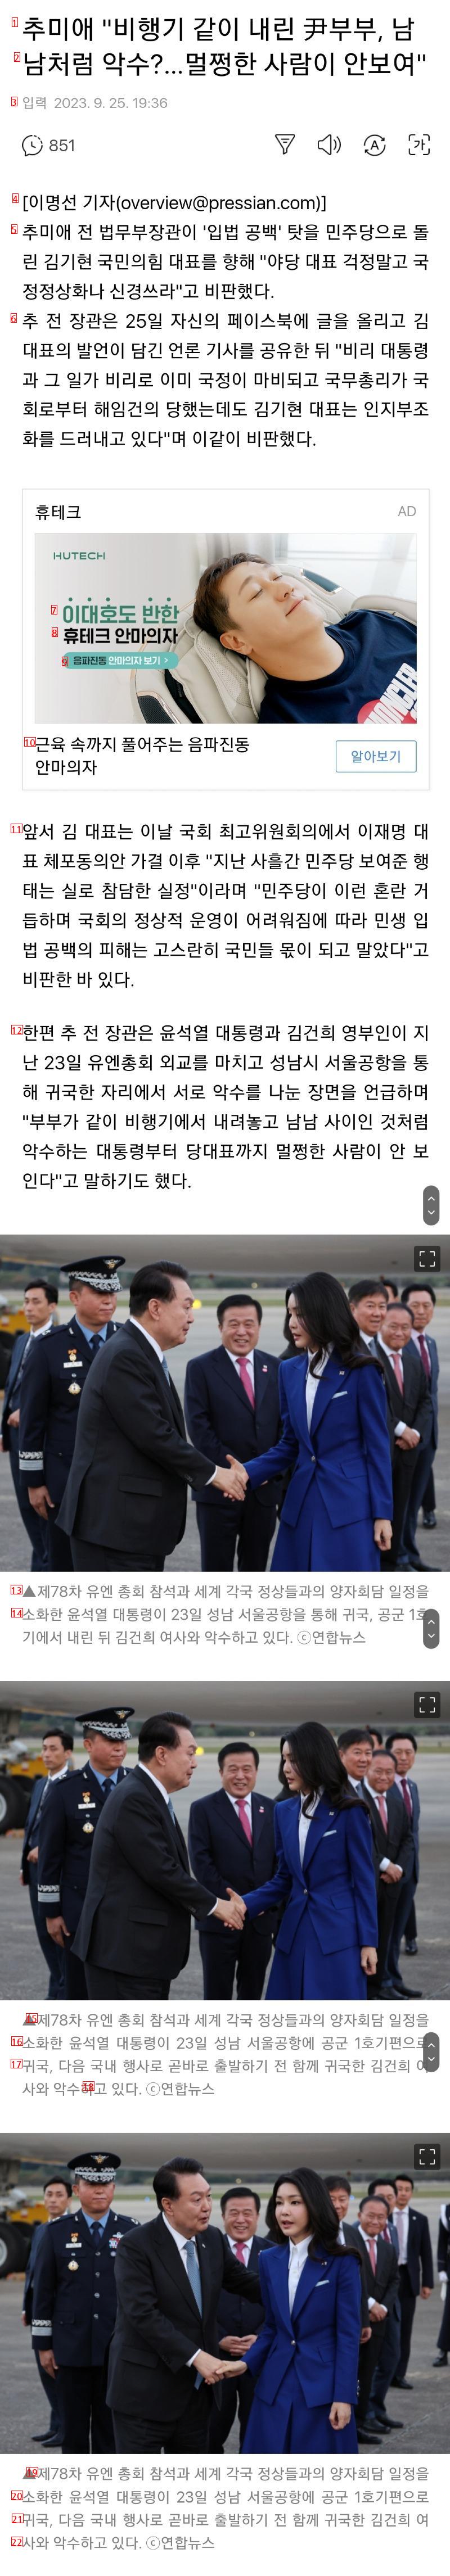 Choo Mi-ae shakes hands like a man between a 尹 couple who got off a plane together...A normal person doesn't